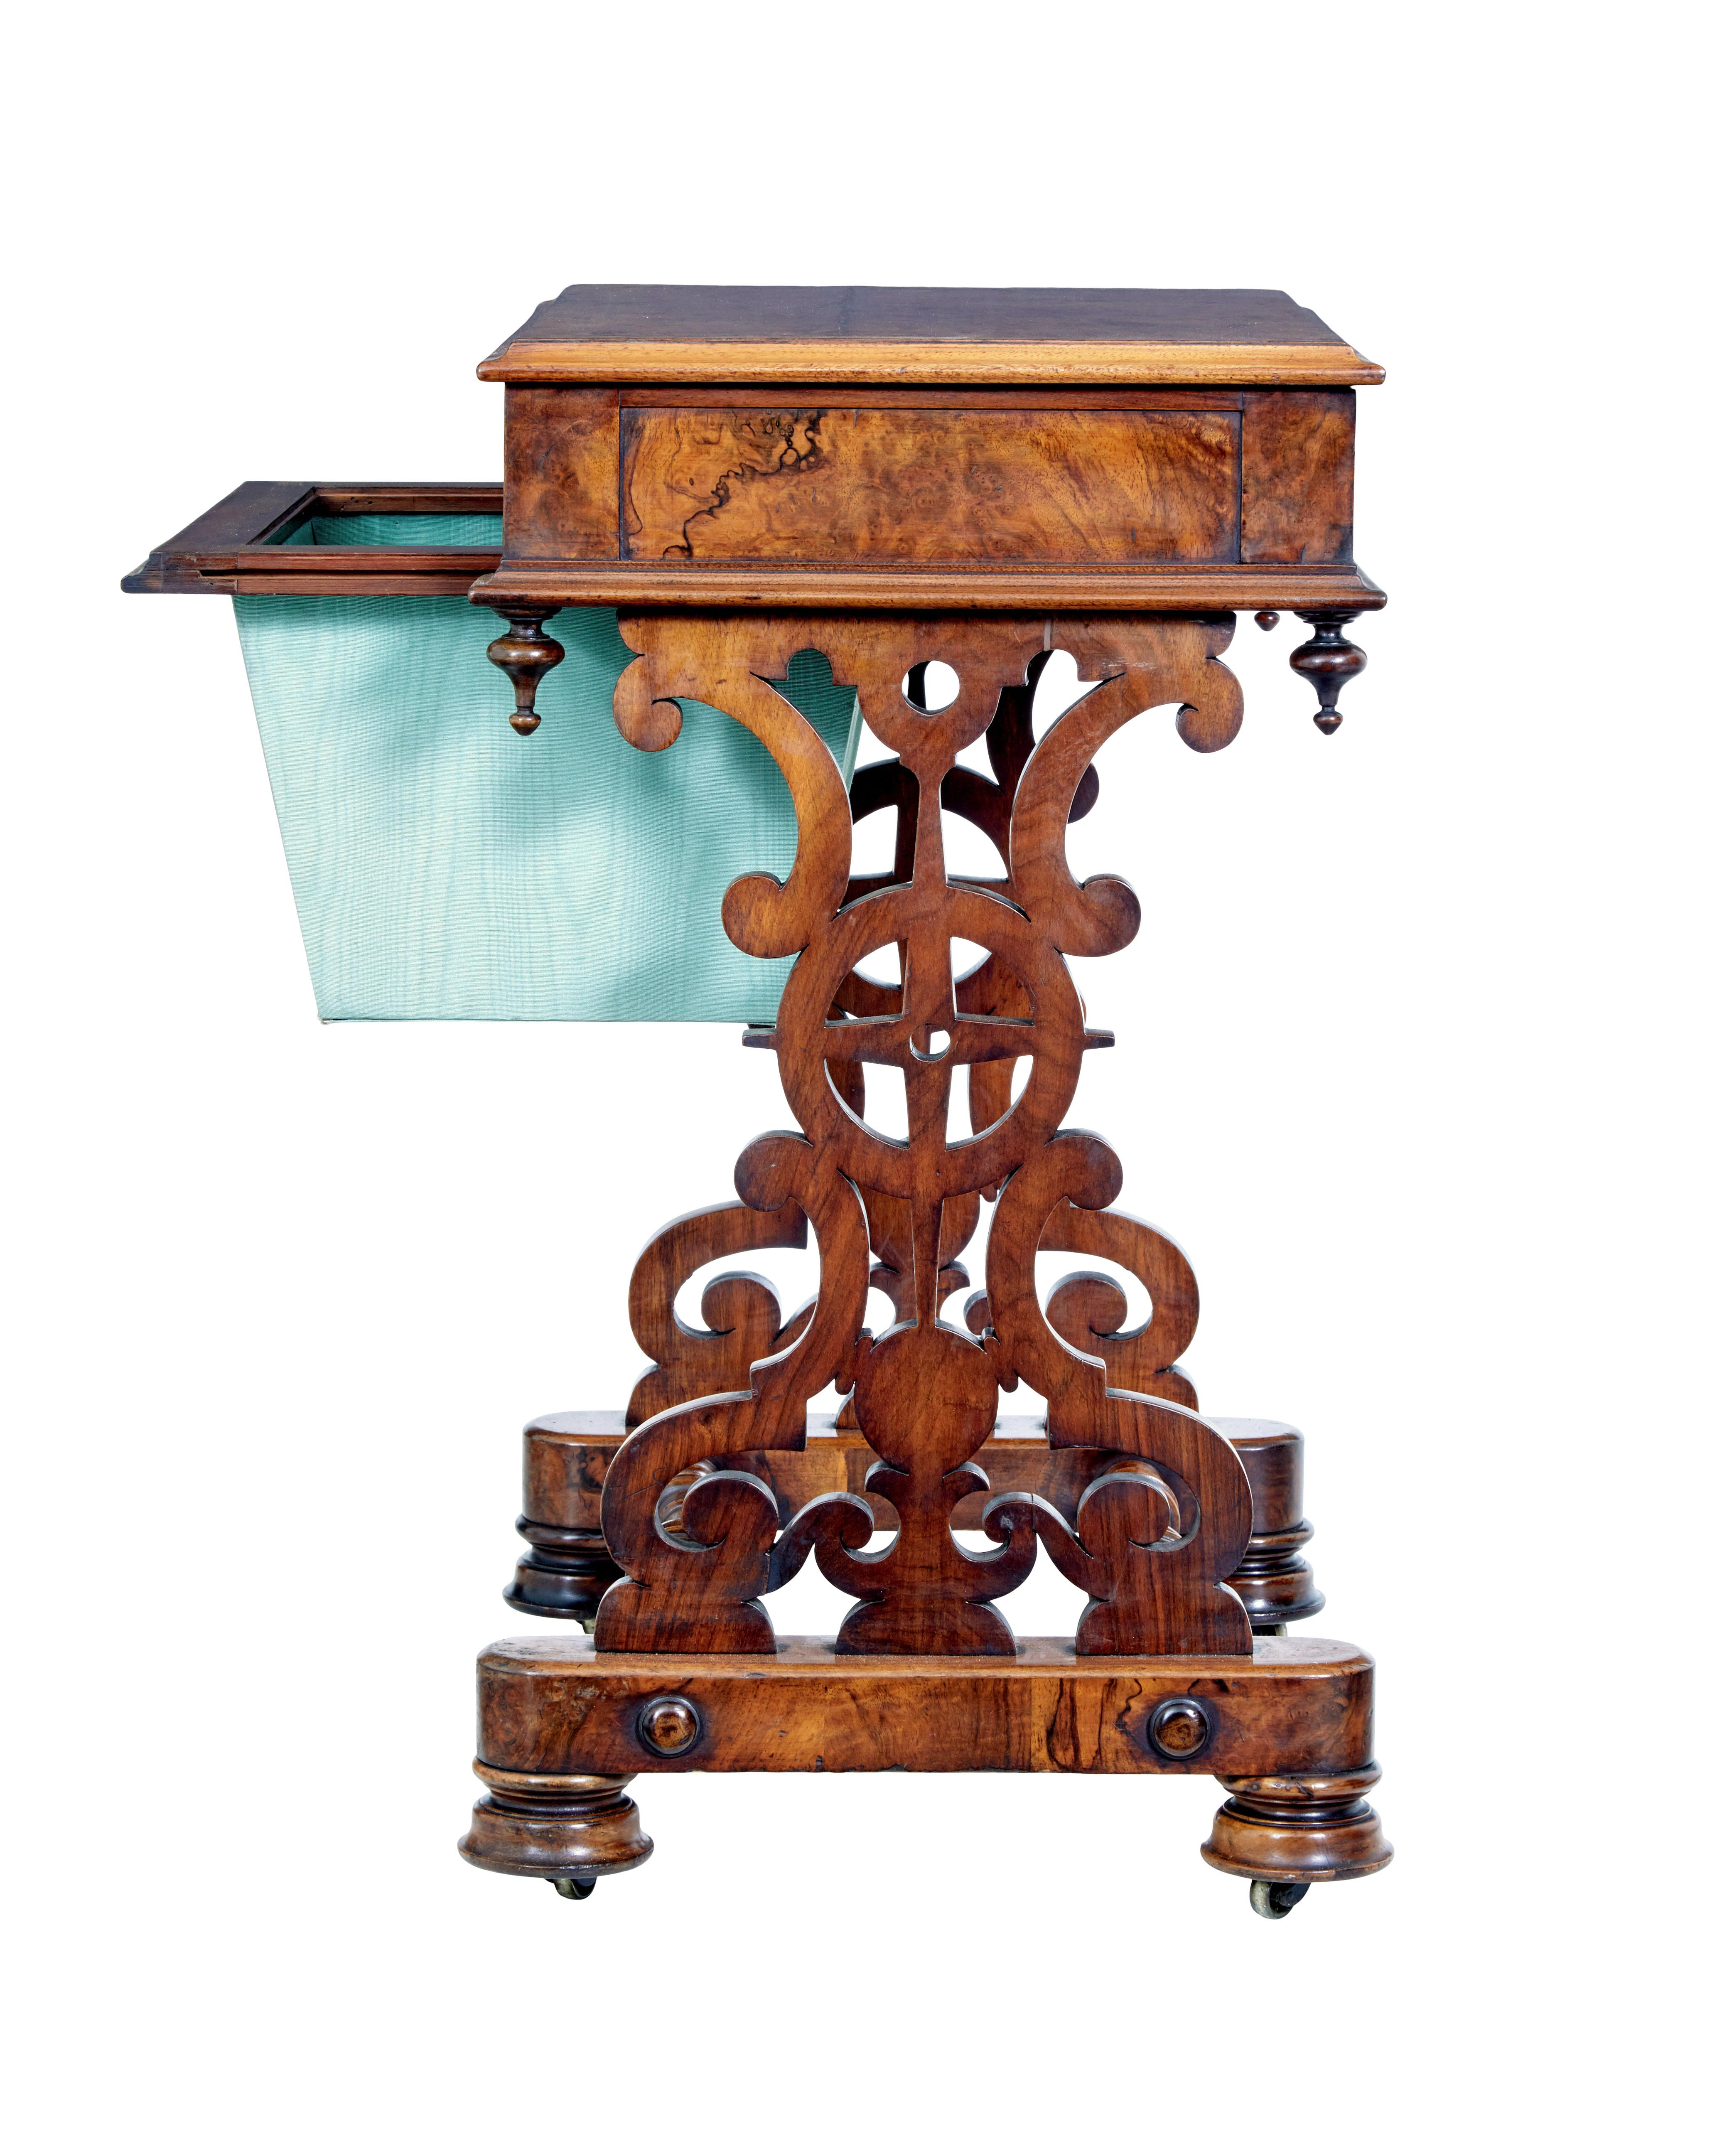 Hand-Carved 19th Century High Victorian Burr Walnut Occasional Table For Sale